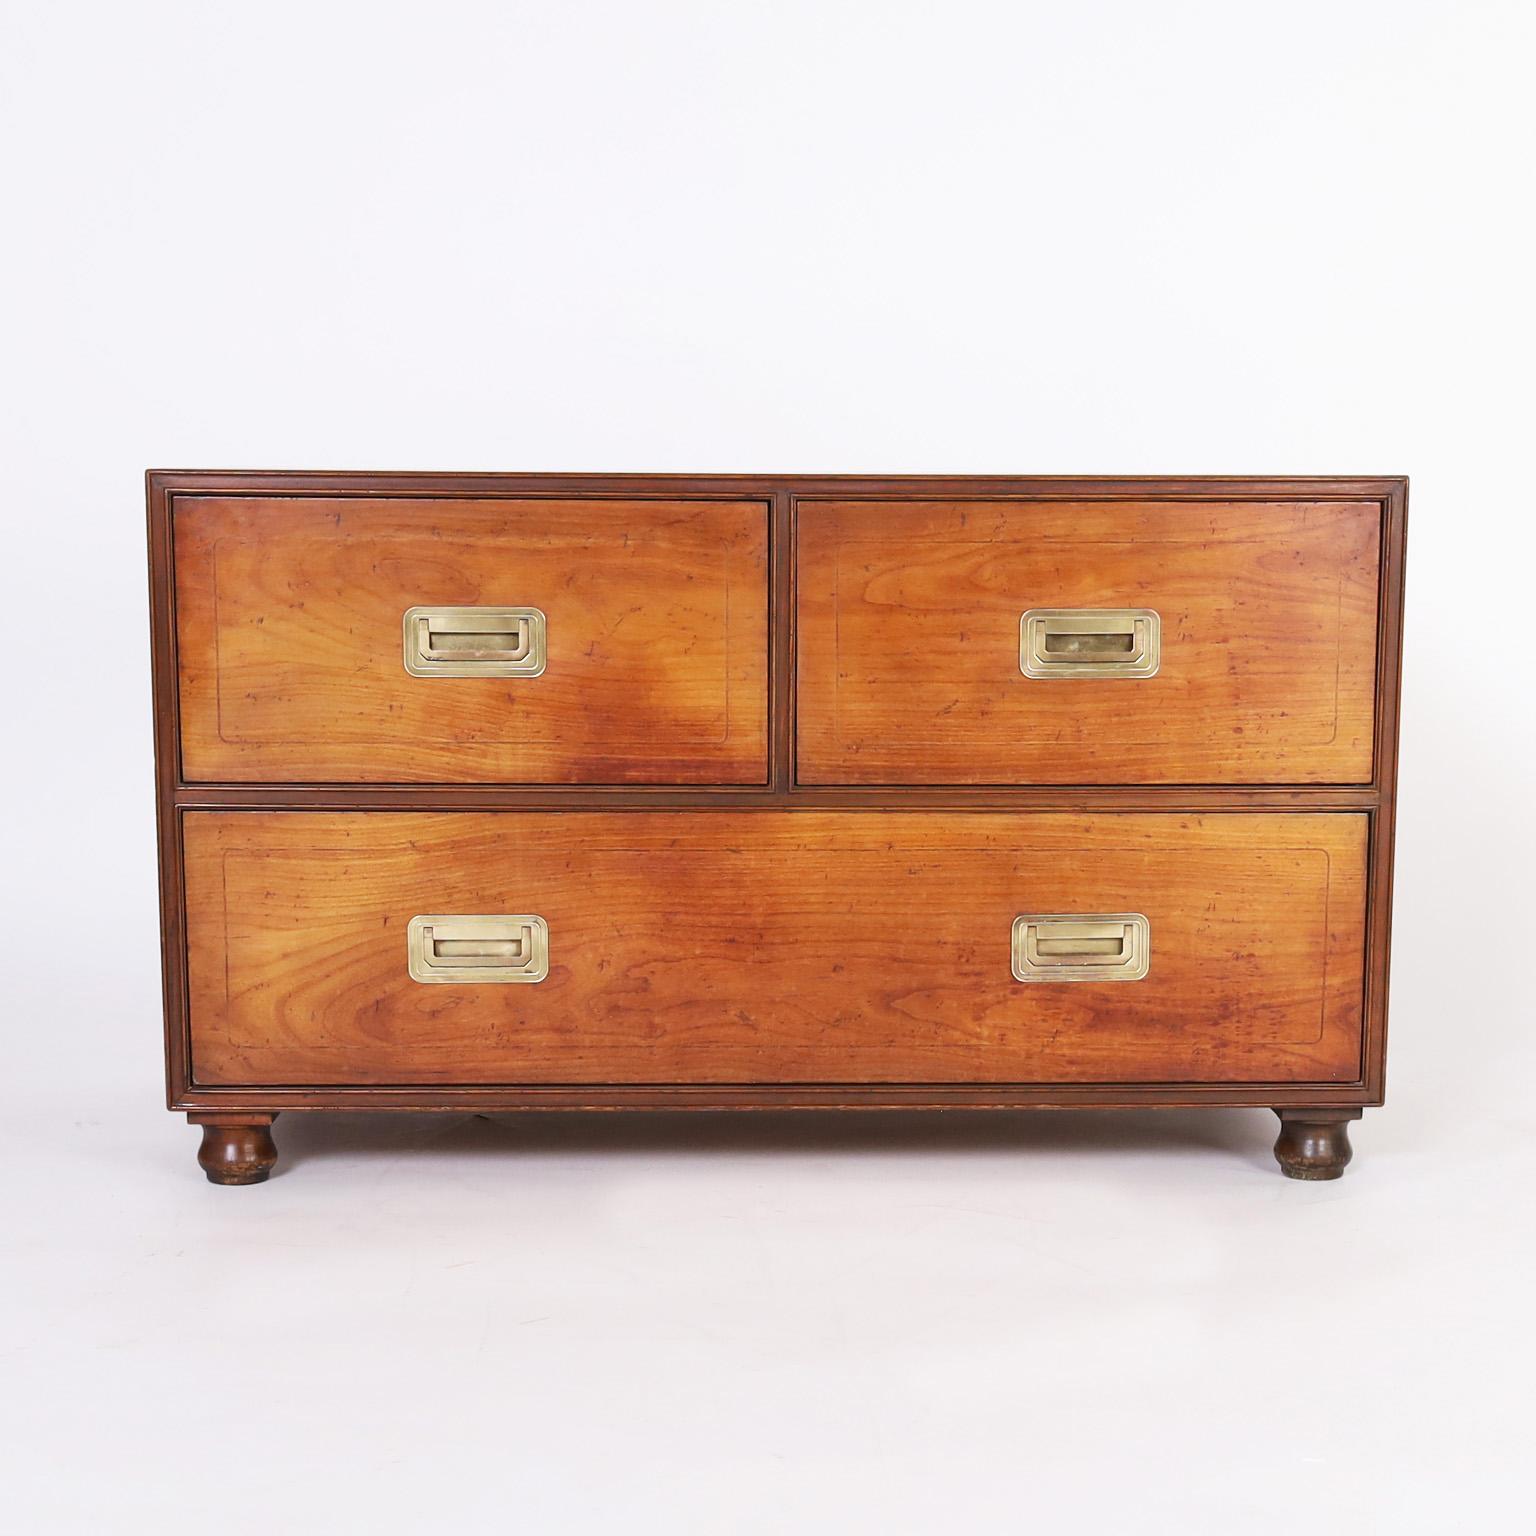 Chic vintage campaign style chest crafted in walnut with three drawers in a hip low form with brass hardware and turned feet. Signed in a drawer with a Baker silver label.